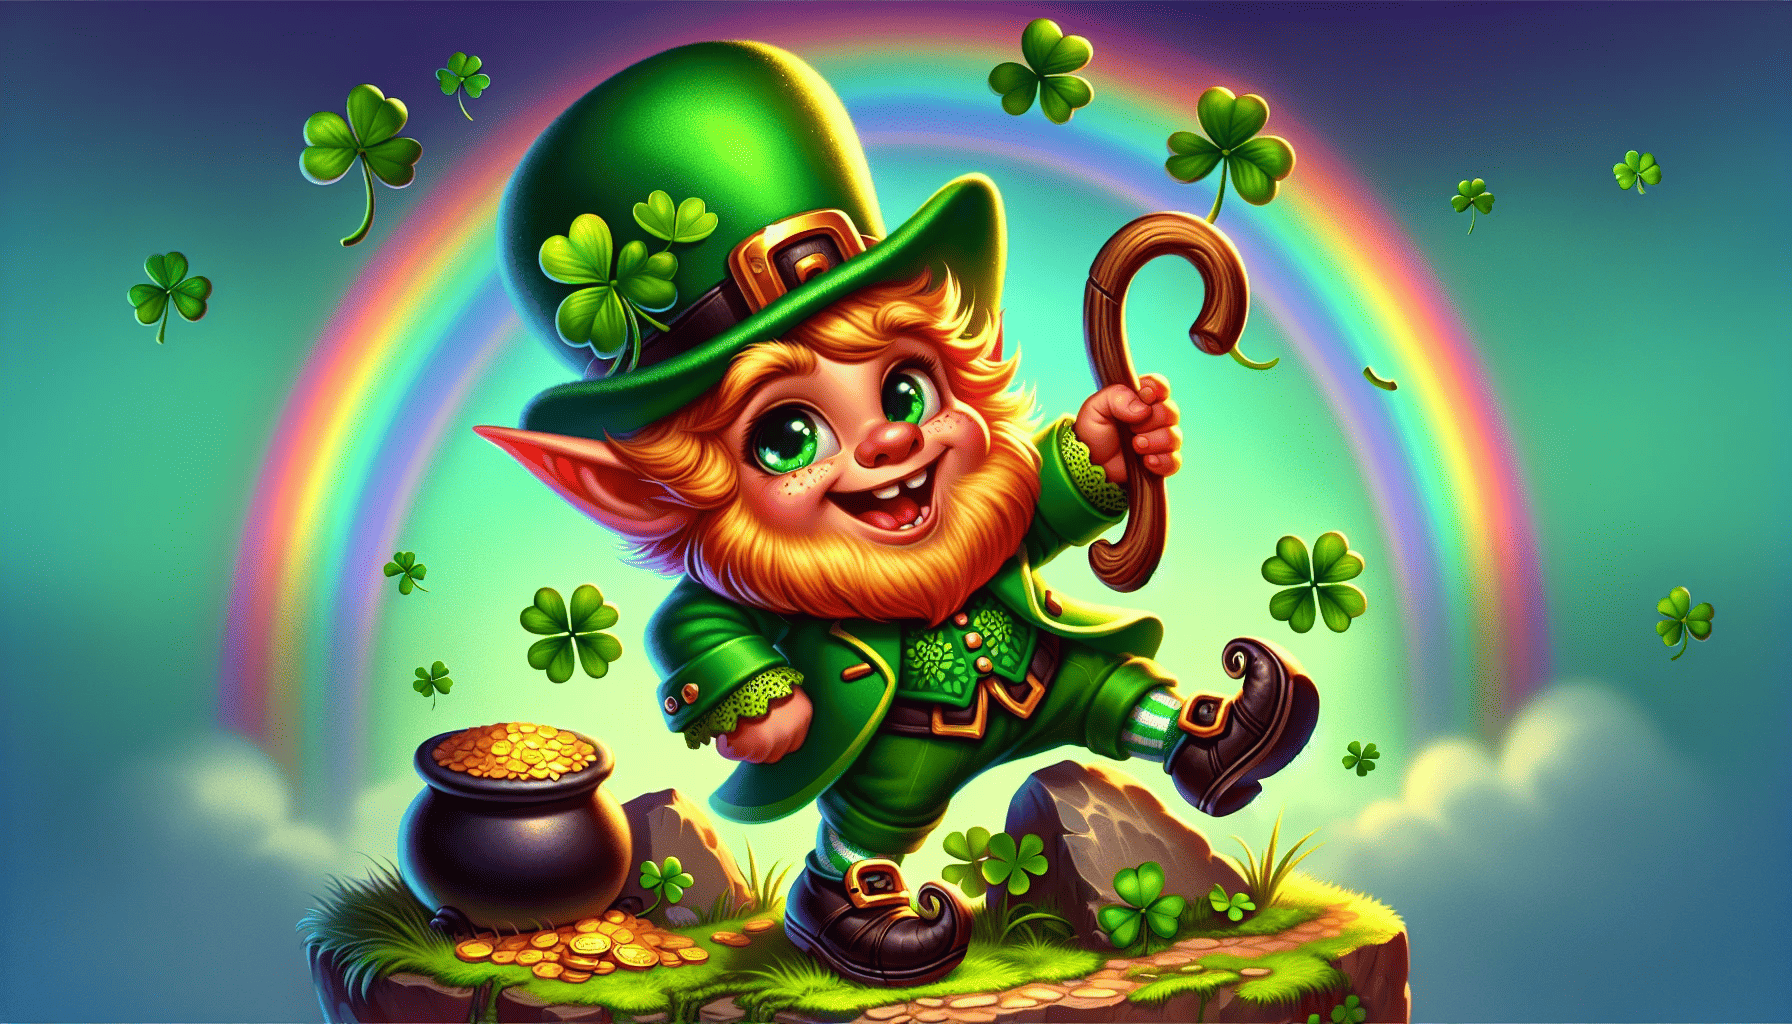 An illustration of a mischievous leprechaun casting a humorous curse, embodying the essence of Irish comedic condemnations